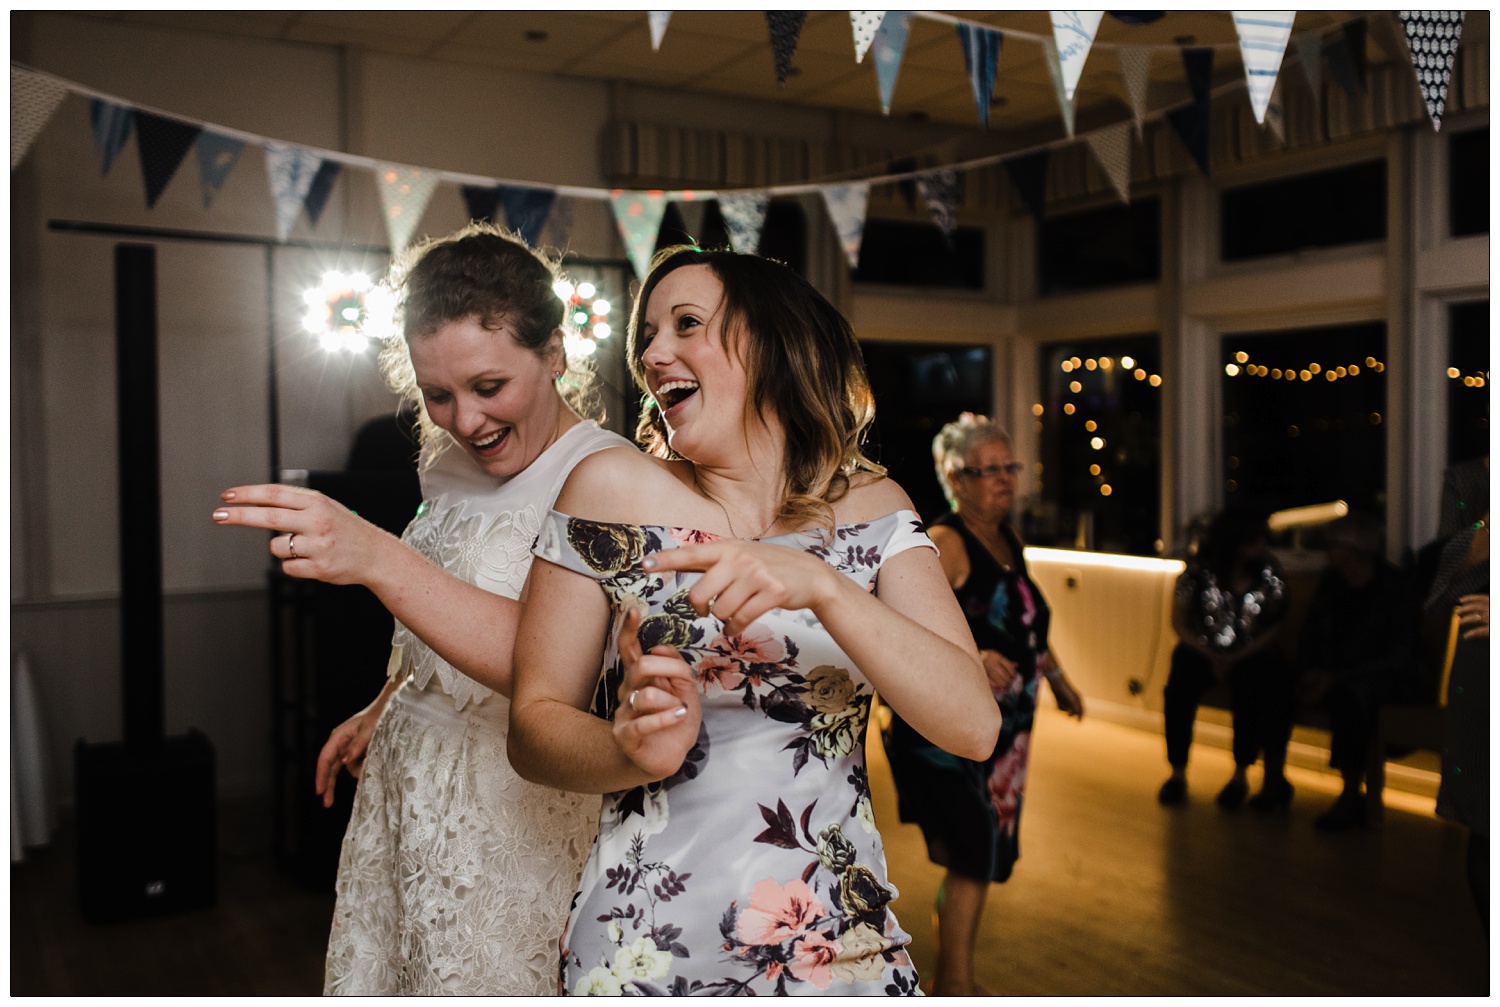 Bride dancing with her friend. There is bunting on the ceiling.